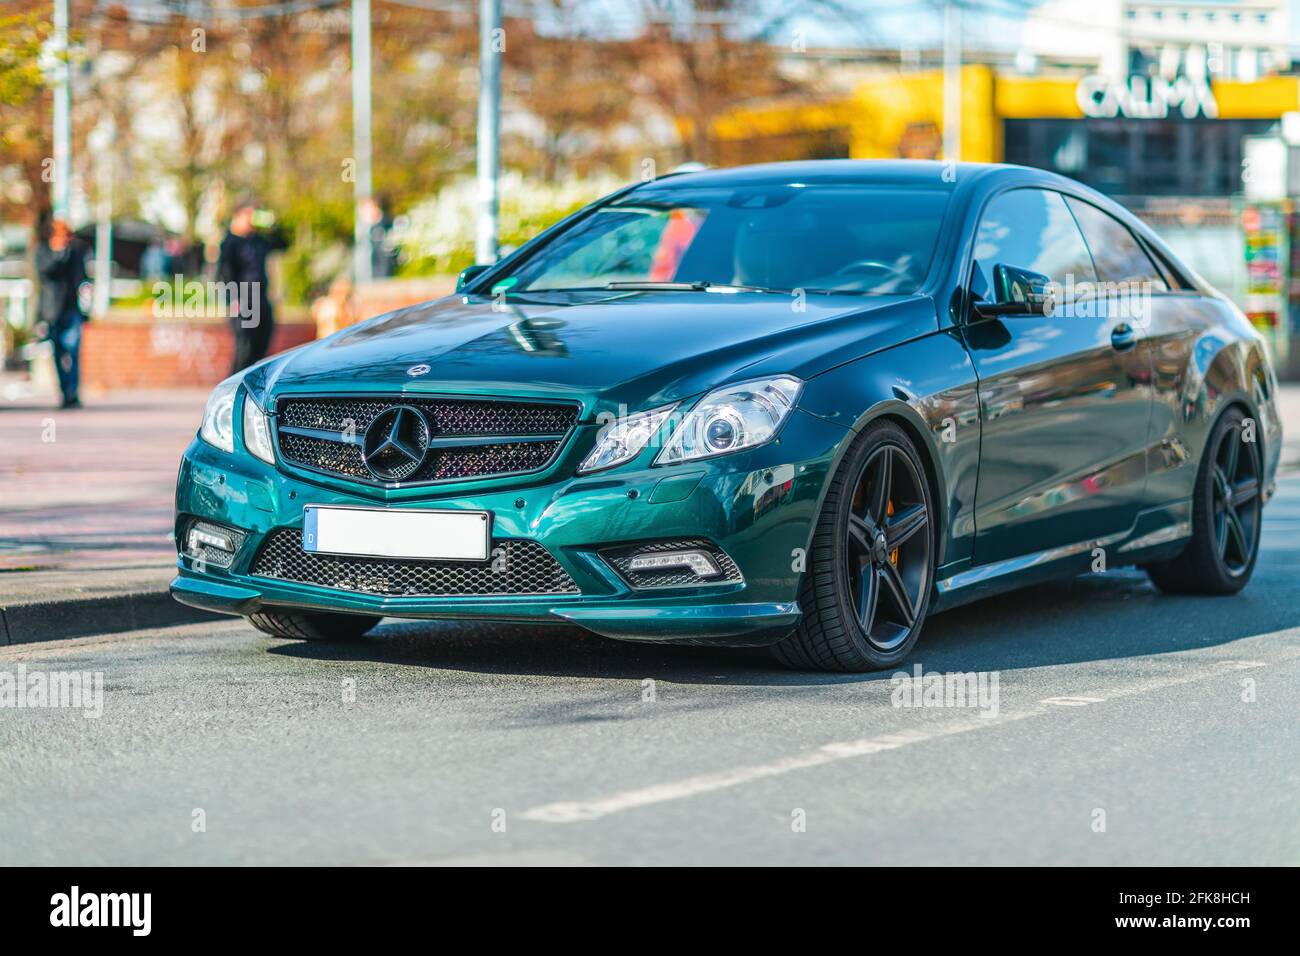 HANOVER / GERMANY - APRIL 25, 2021: Mercedes Benz E Class Coupe stands on a street in Hanover. Stock Photo